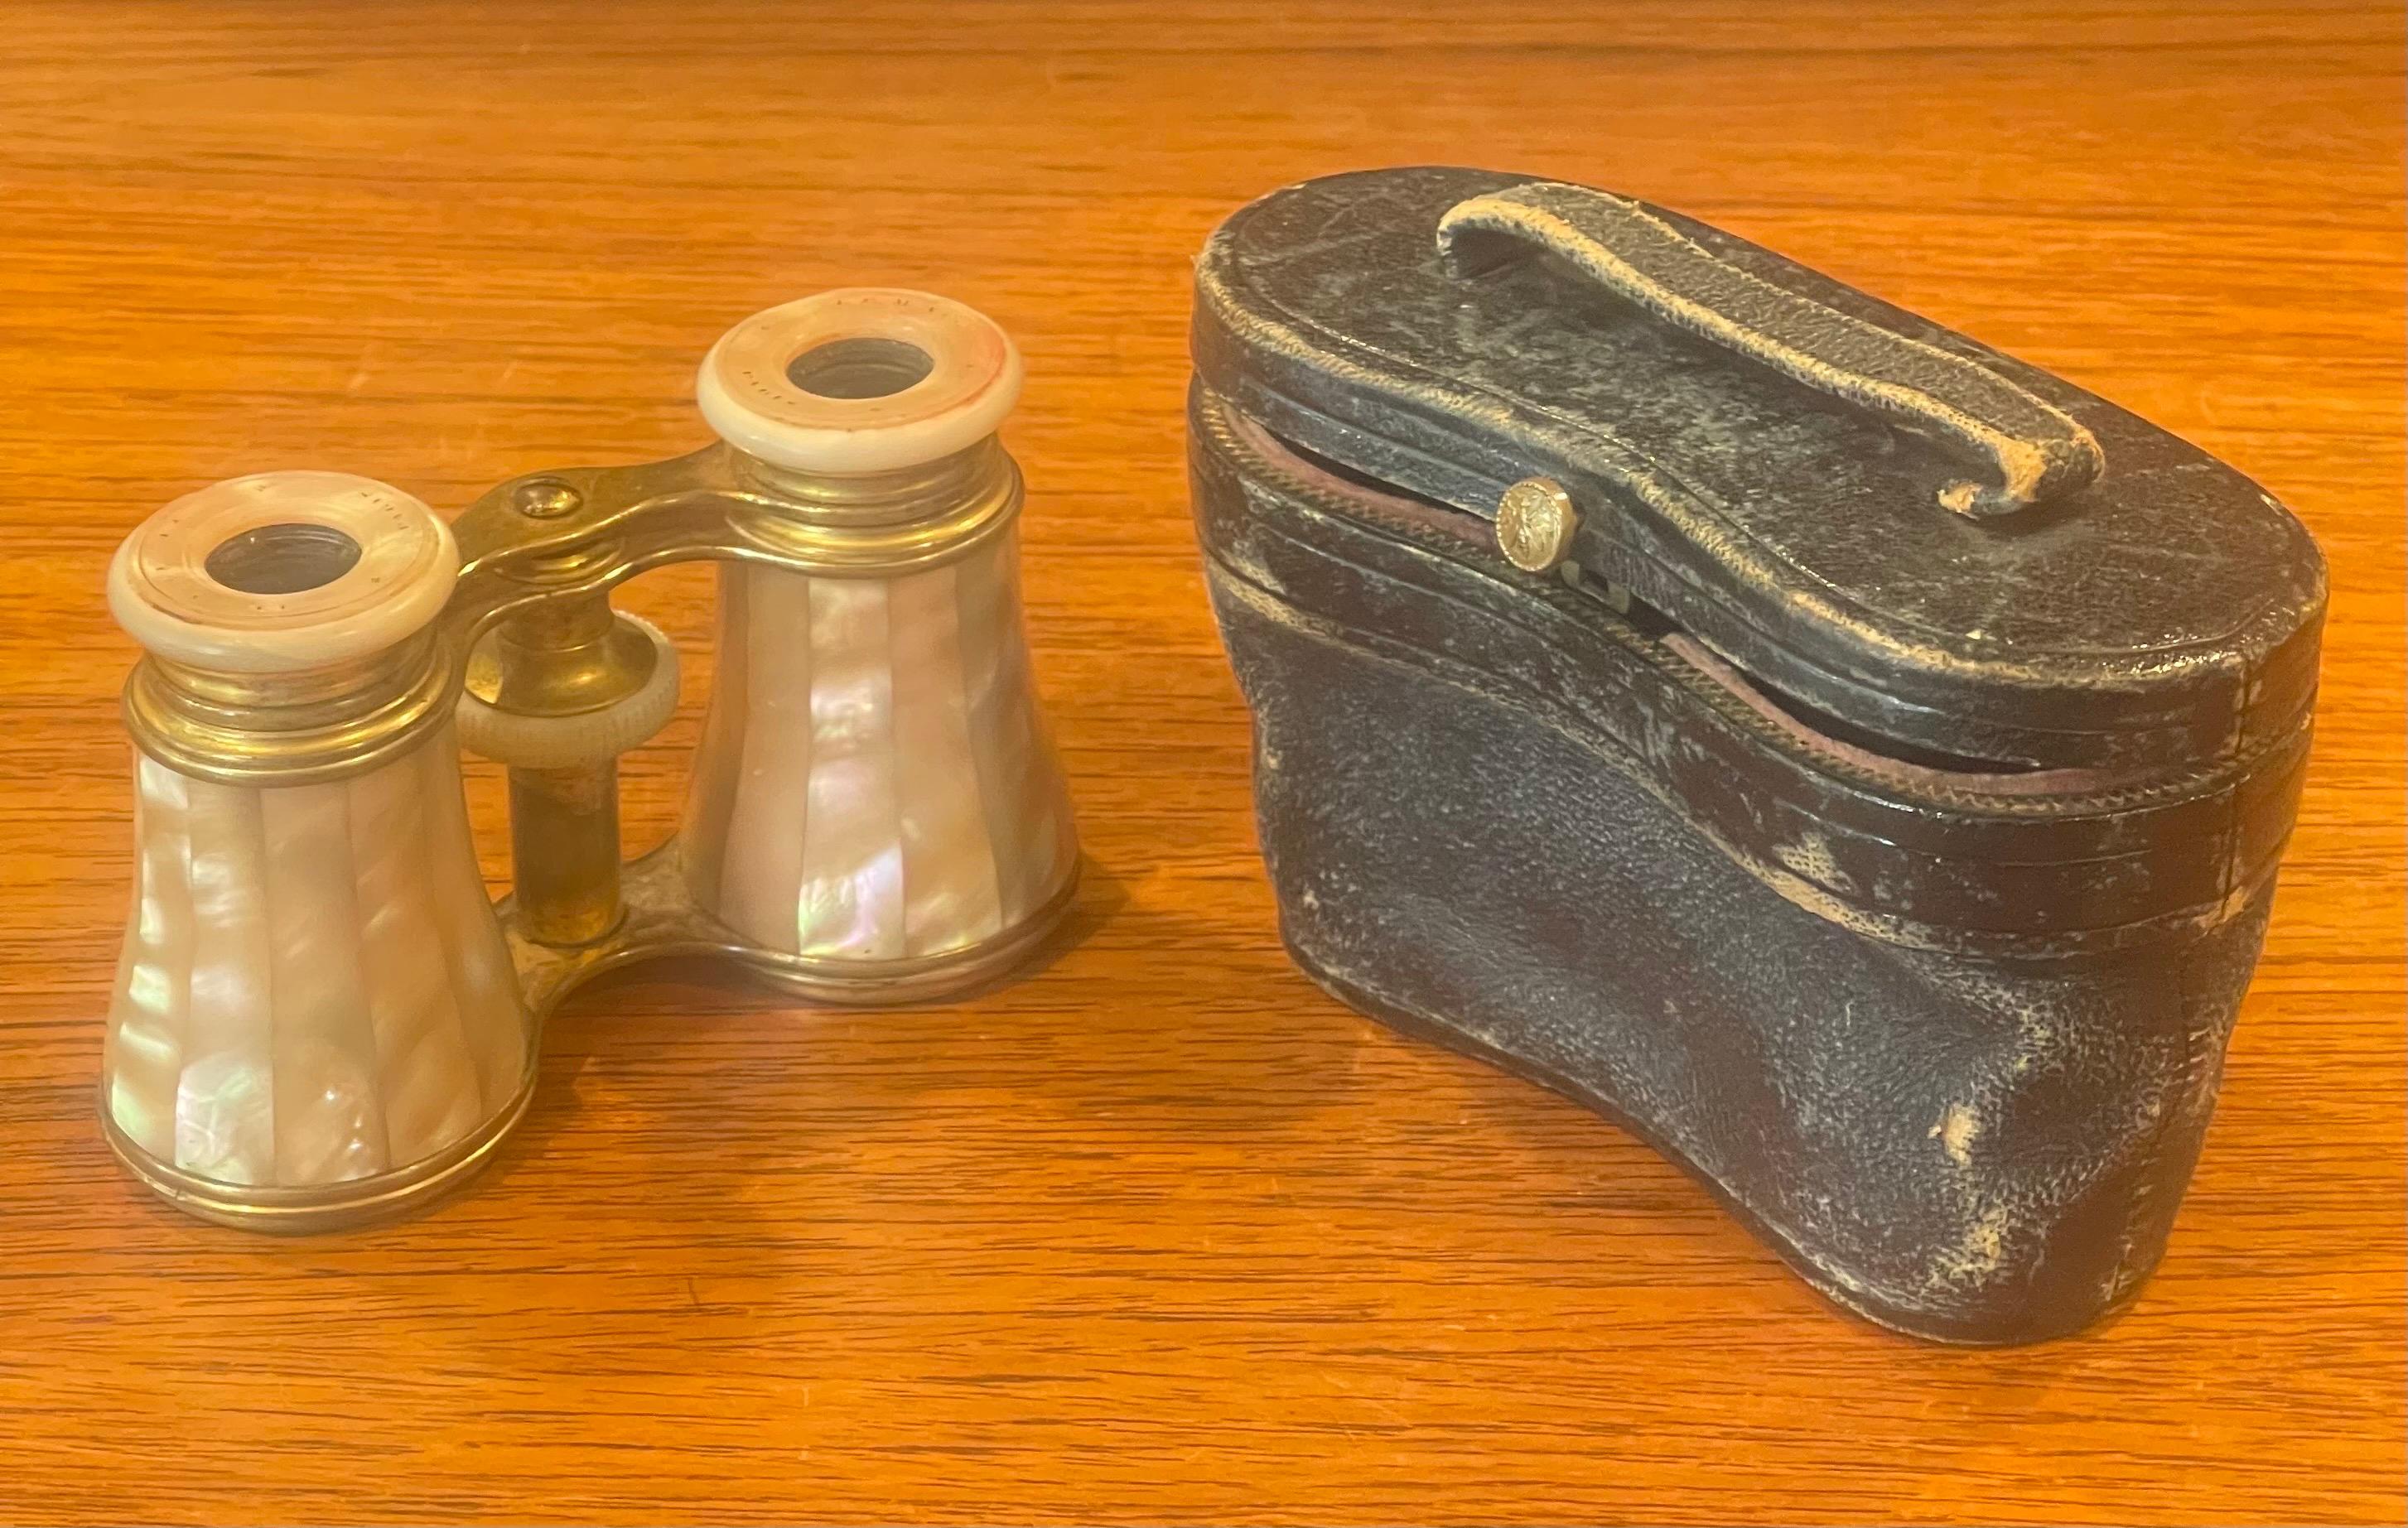 Vintage French Mother-of-Pearl & Brass Opera Glasses with Case by LeMaire Paris In Good Condition For Sale In San Diego, CA